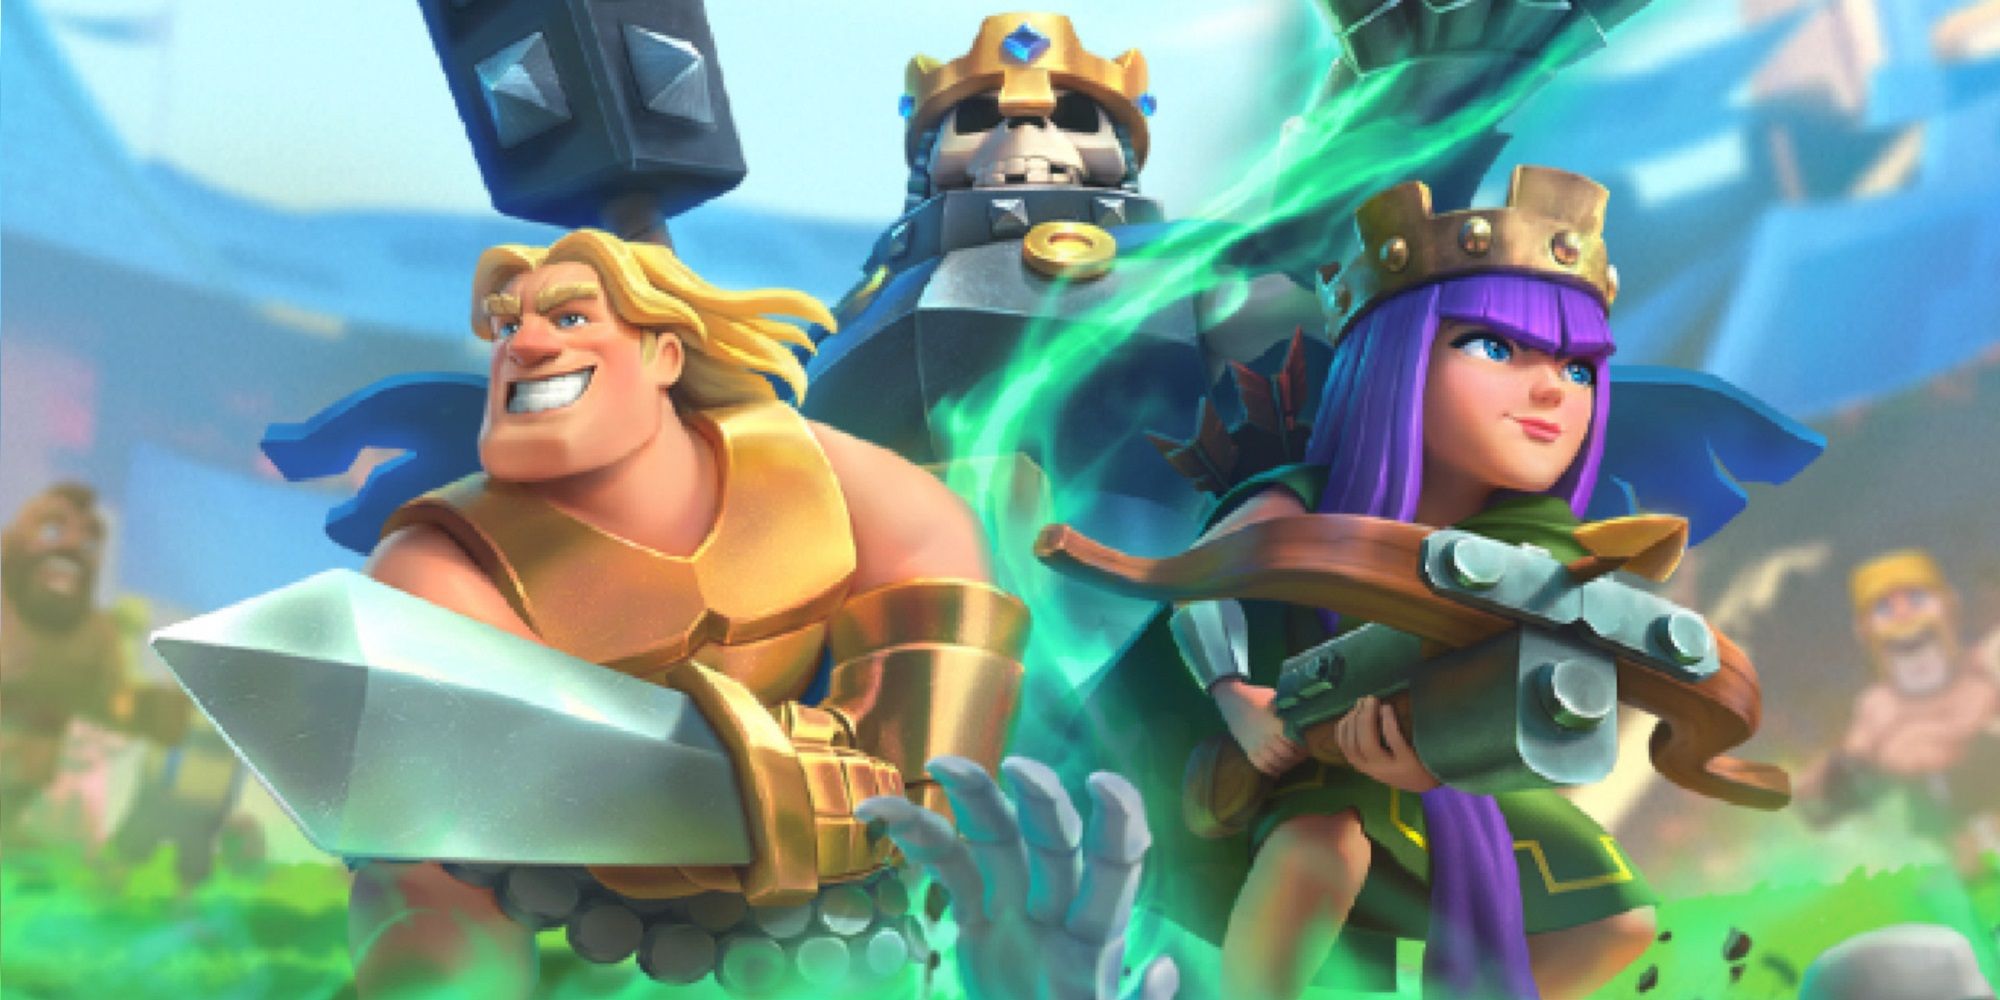 Clash Royale: Golden Knight left, Skeleton King middle, Archer Queen right